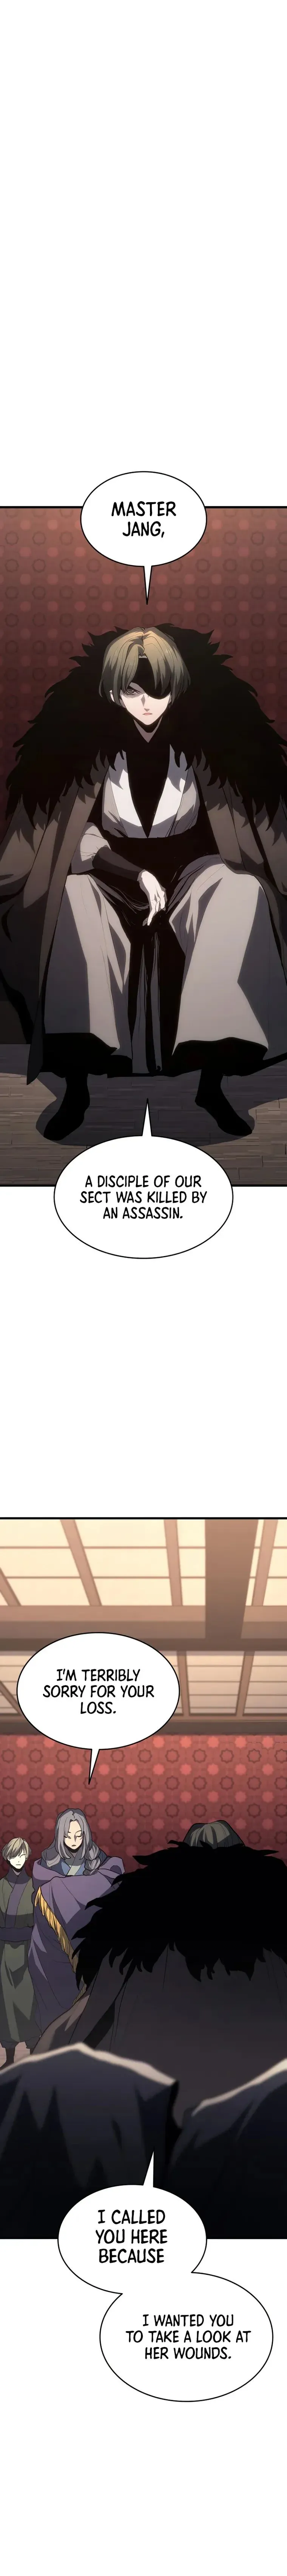 Reaper of the Drifting Moon chapter 37 - Page 16